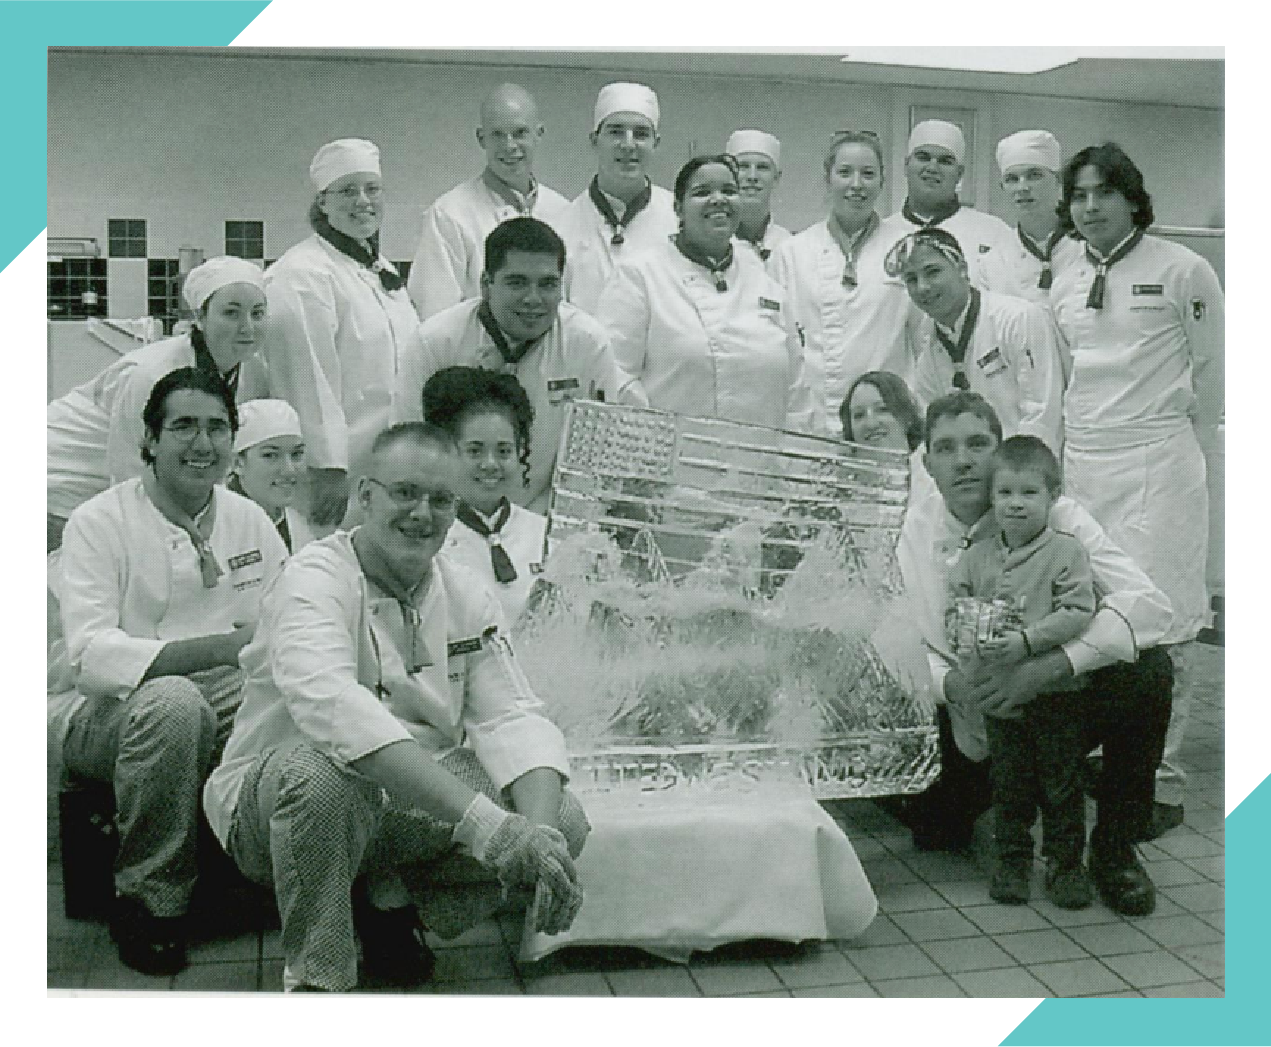 JWU students pose by their ice carving in 2002